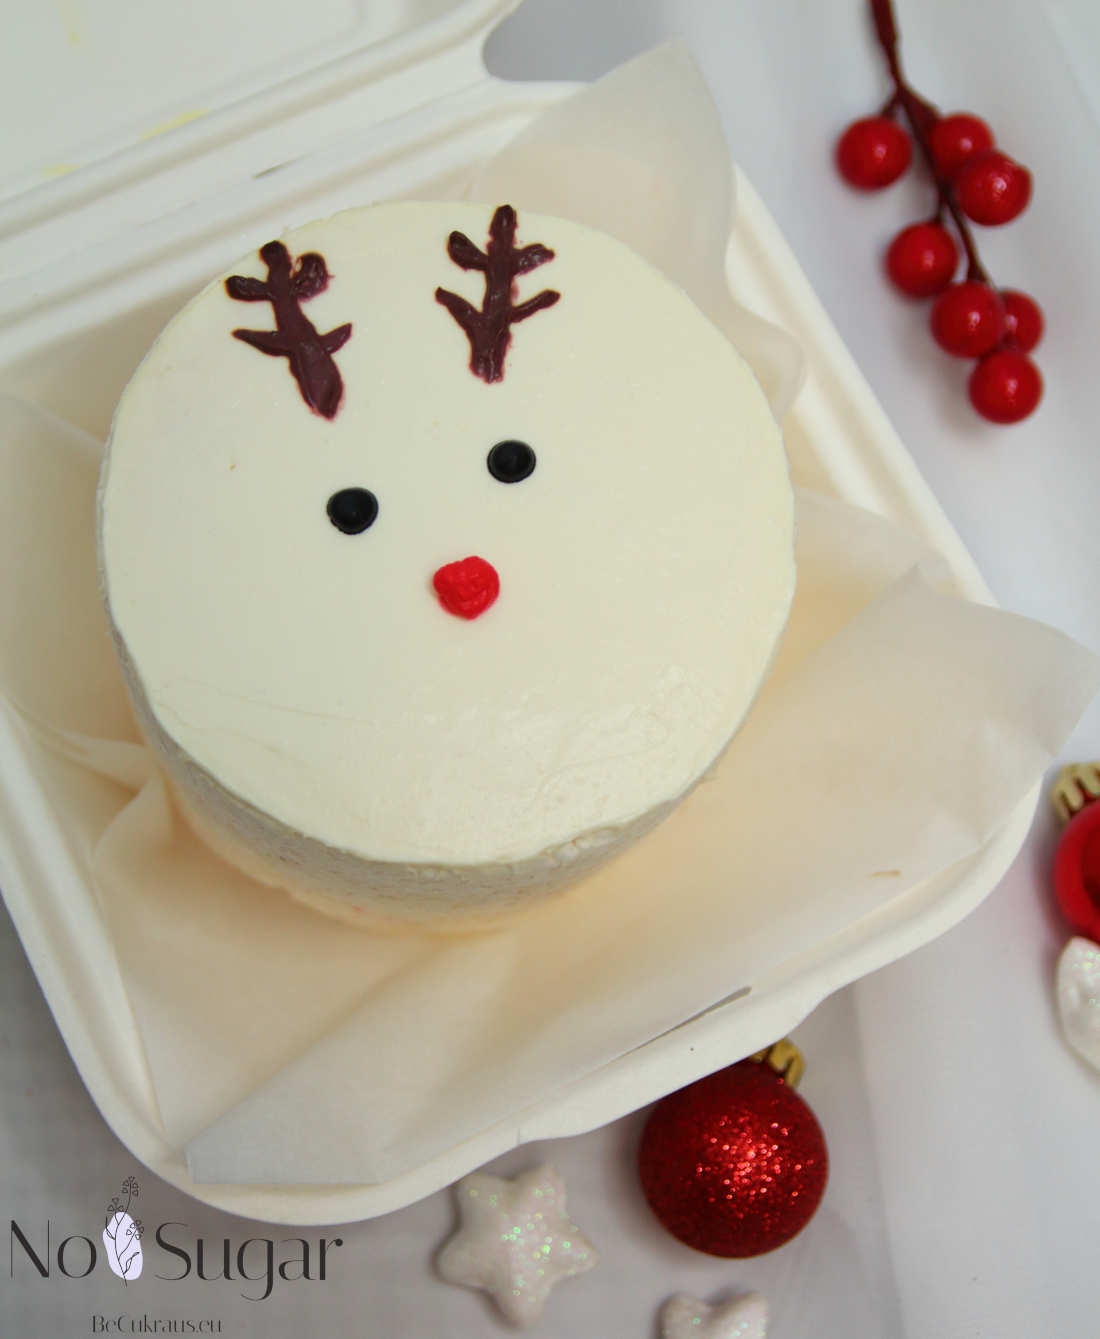 Bento cake with deer antlers for New Year and Christmas